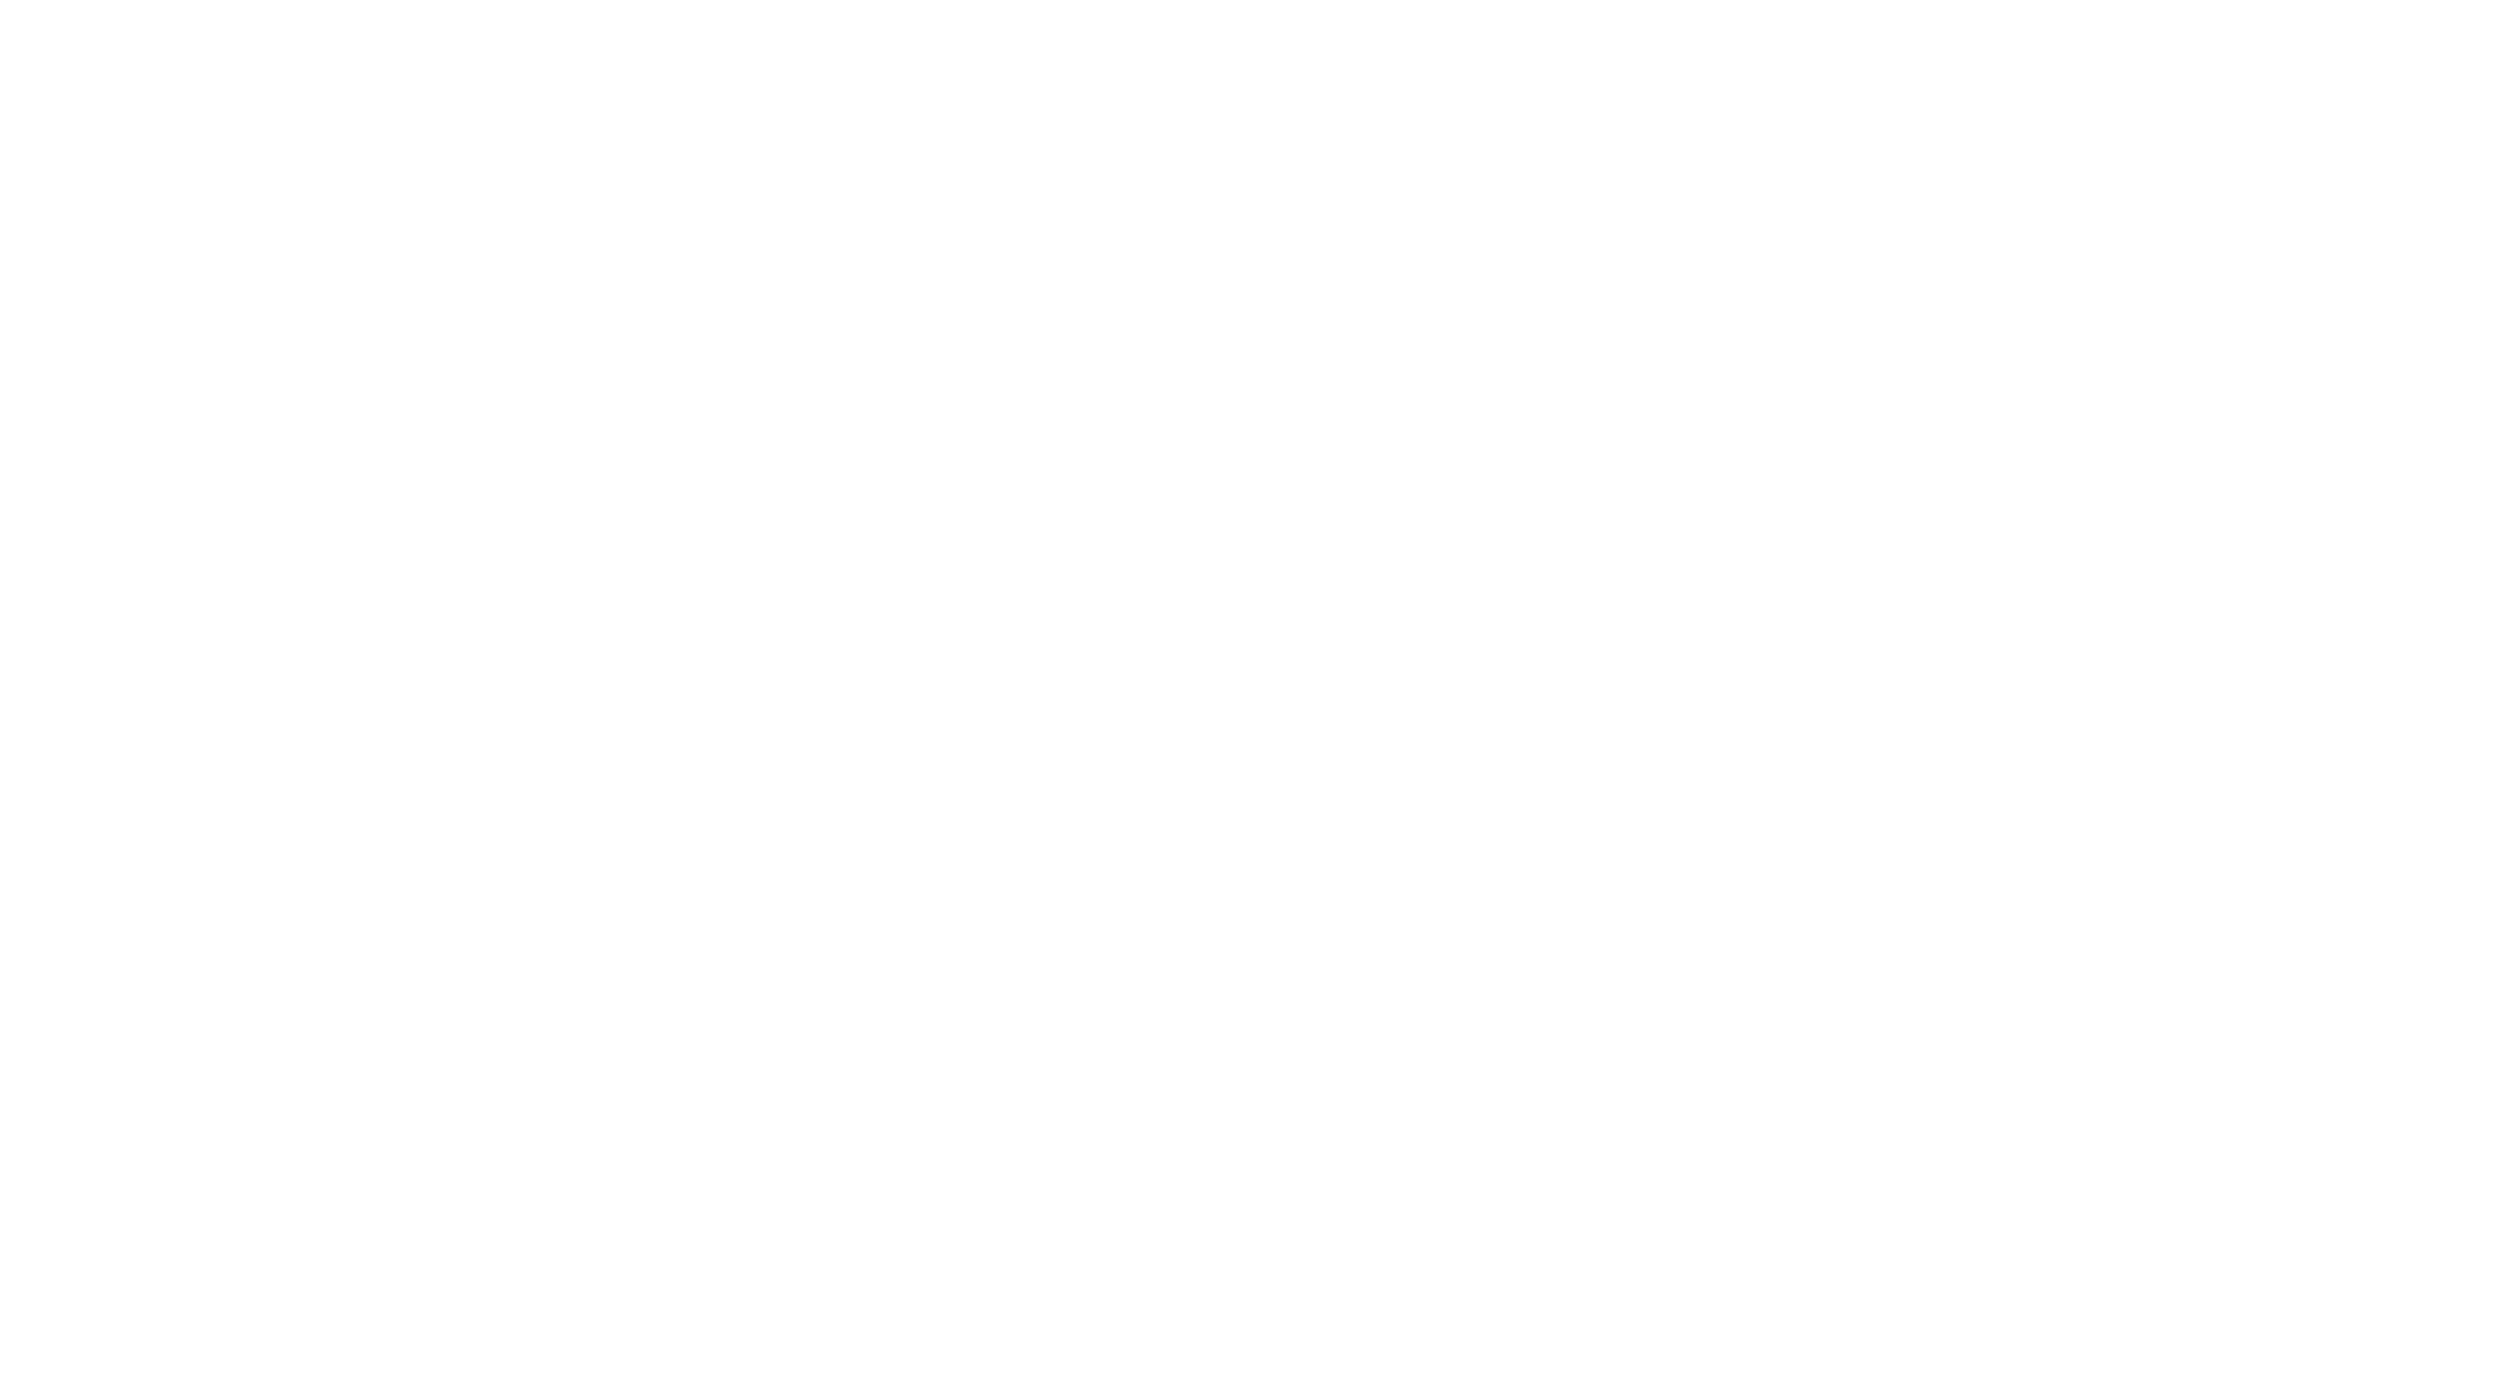 Imma local logo white.png